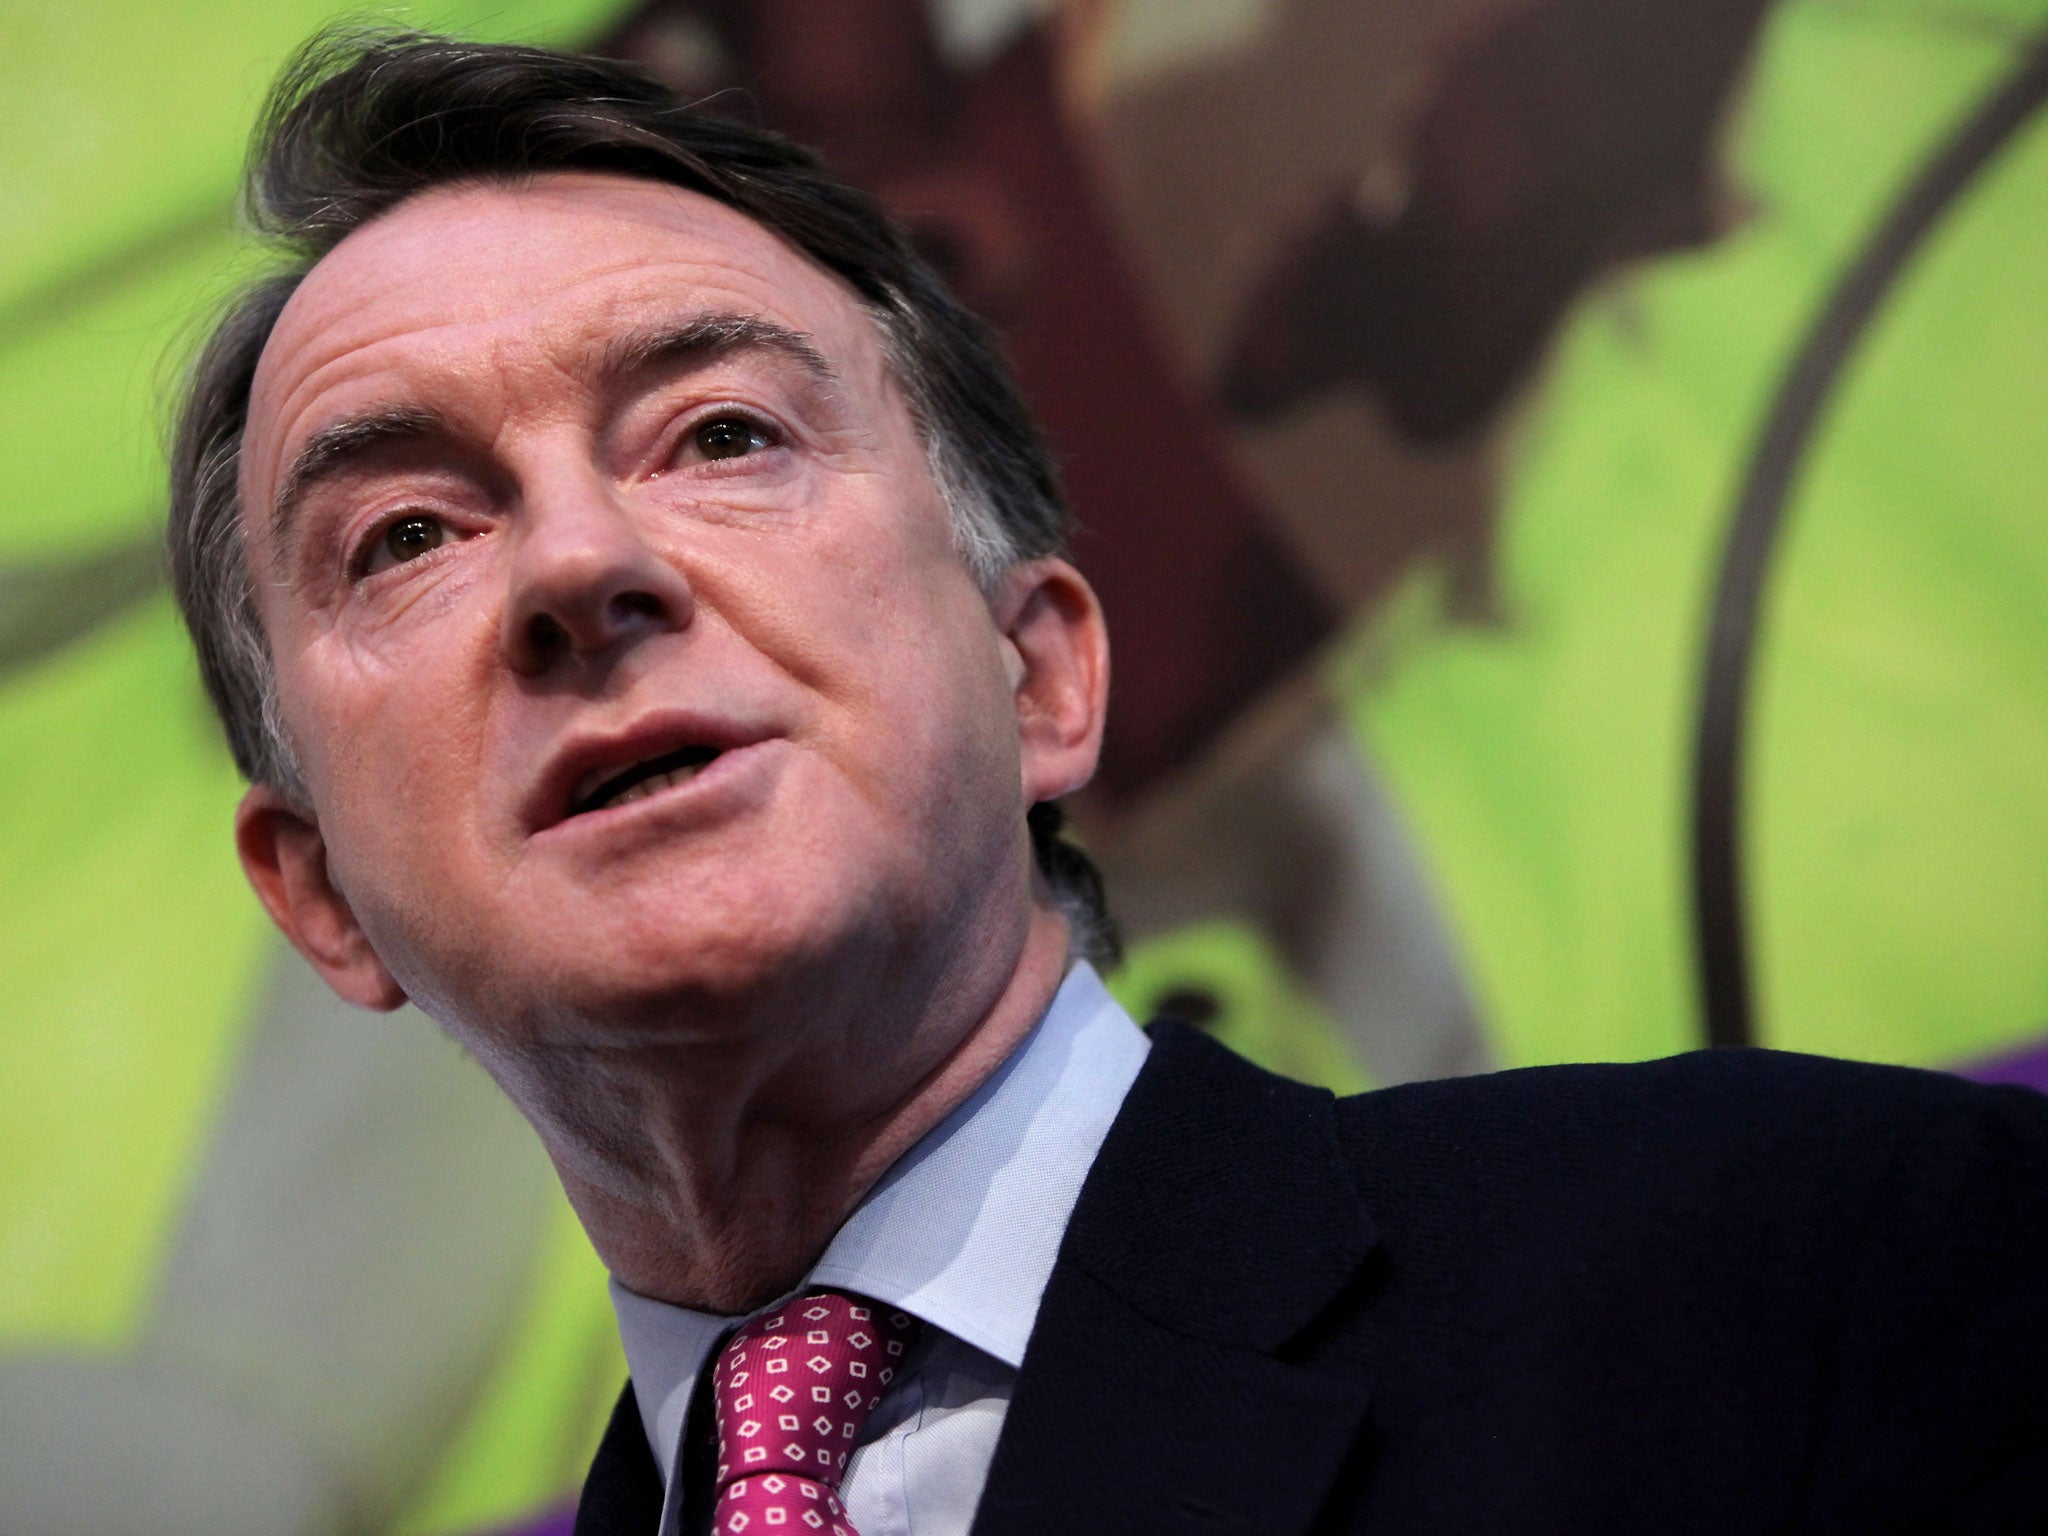 Graham Stringer wants Lord Mandelson (above) to return as the Opposition’s chief spin-doctor